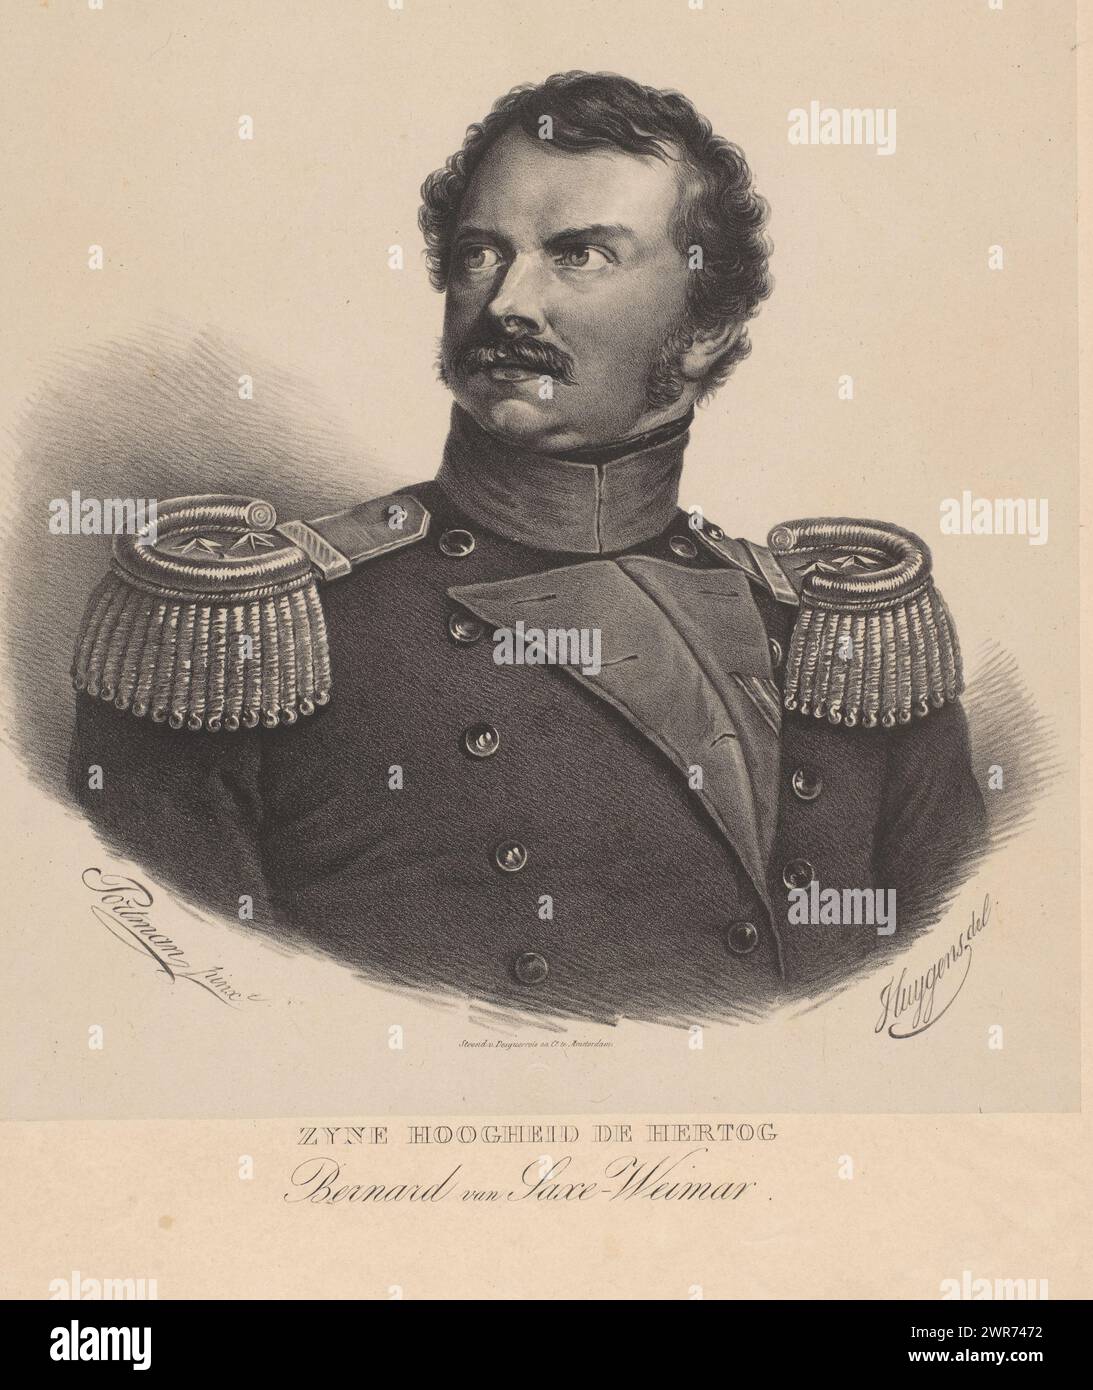 Portrait of Charles Bernard Duke of Saxe-Weimar-Eisenach, The sitter is wearing a military uniform. His name below the portrait., print maker: Frederik Lodewijk Huygens, after painting by: Portman, printer: Desguerrois & Co., Amsterdam, 1831, paper, height 445 mm × width 345 mm, print Stock Photo